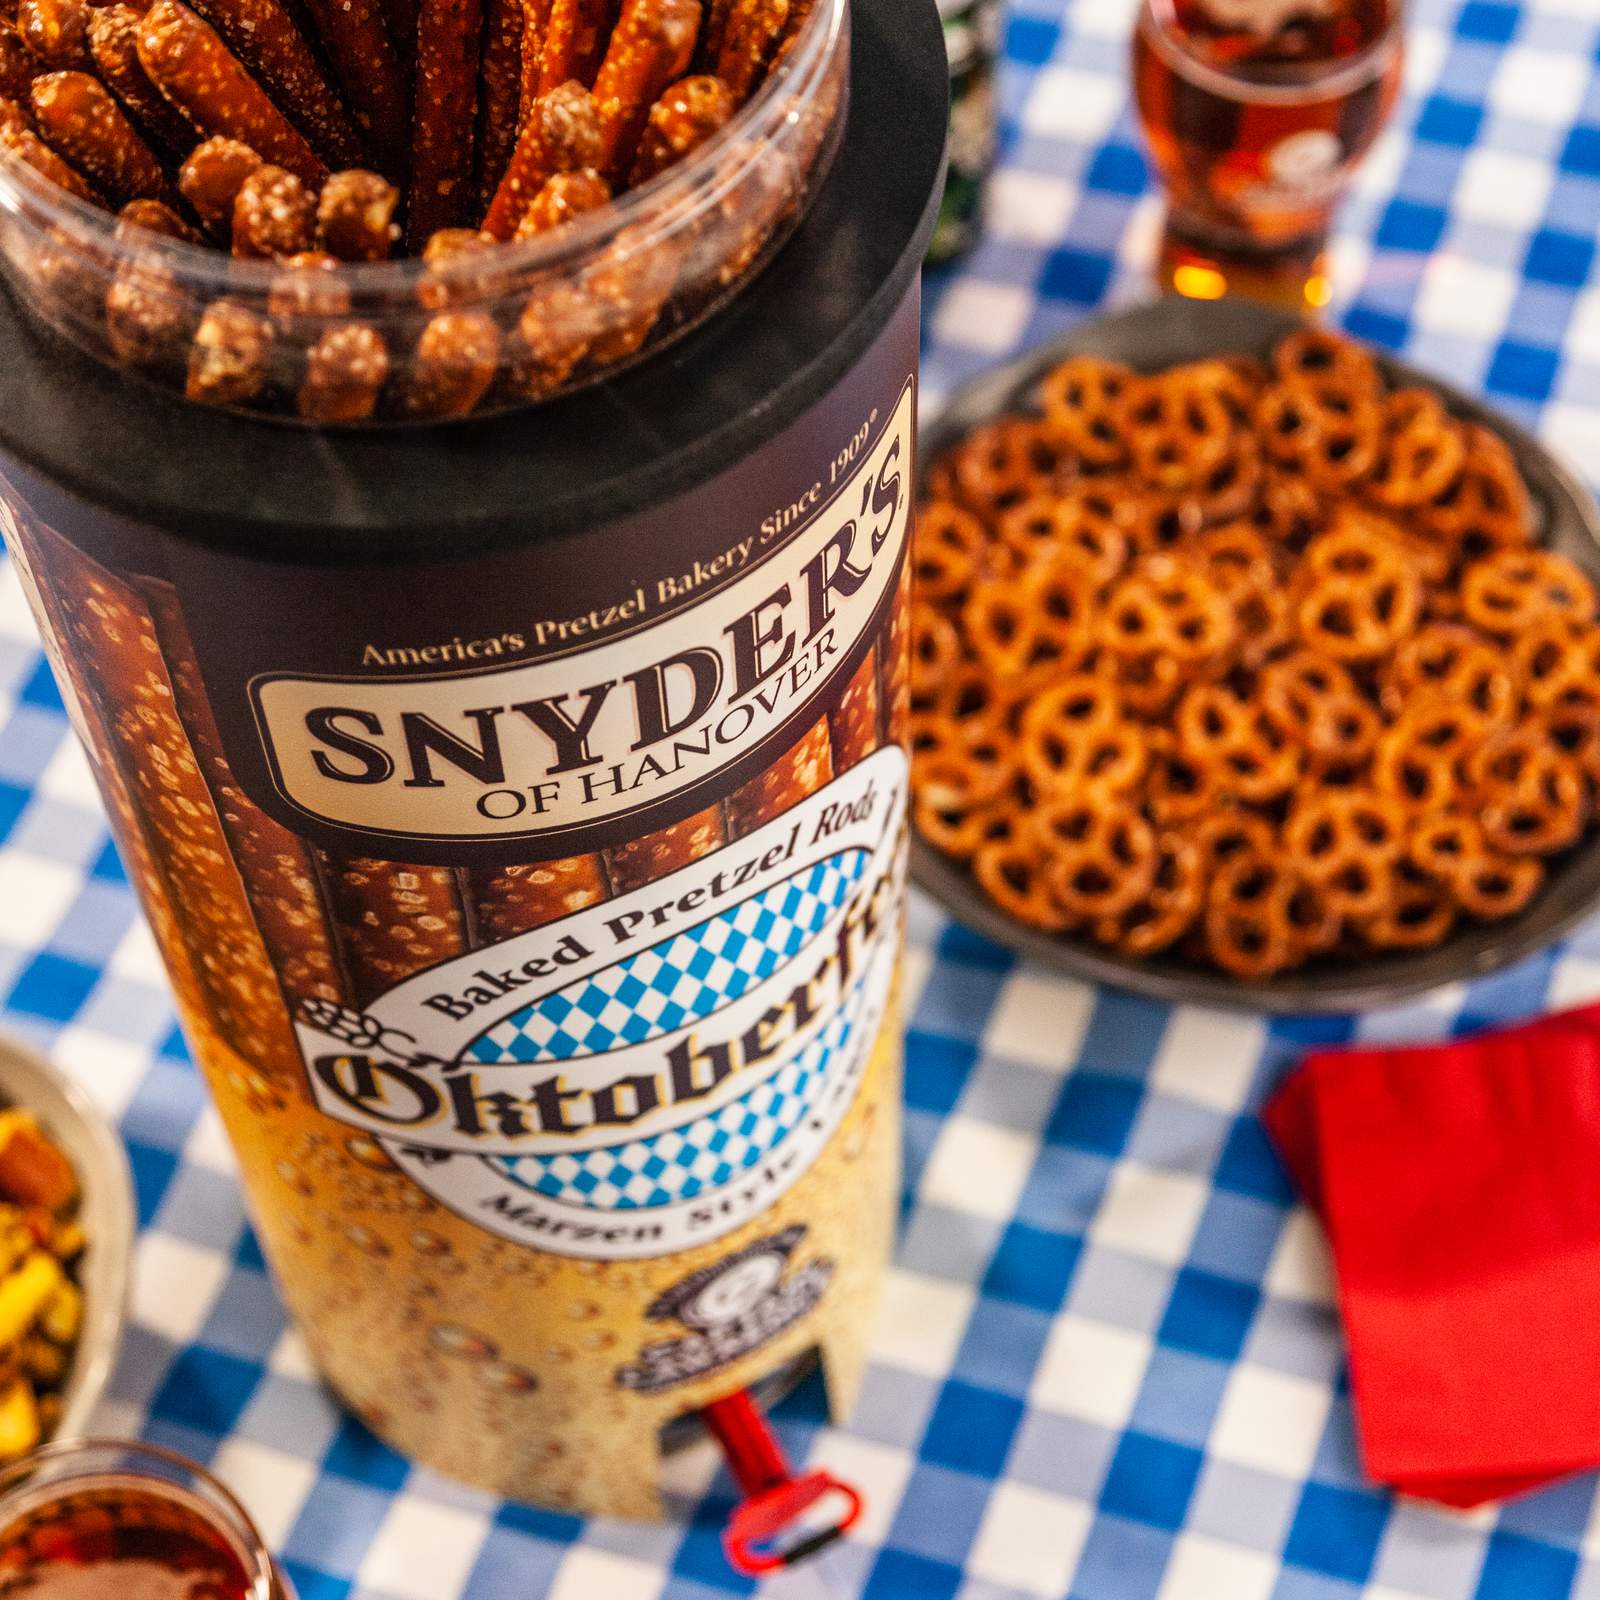 Oktoberfest at home: This pretzel and beer keg could be the ticket